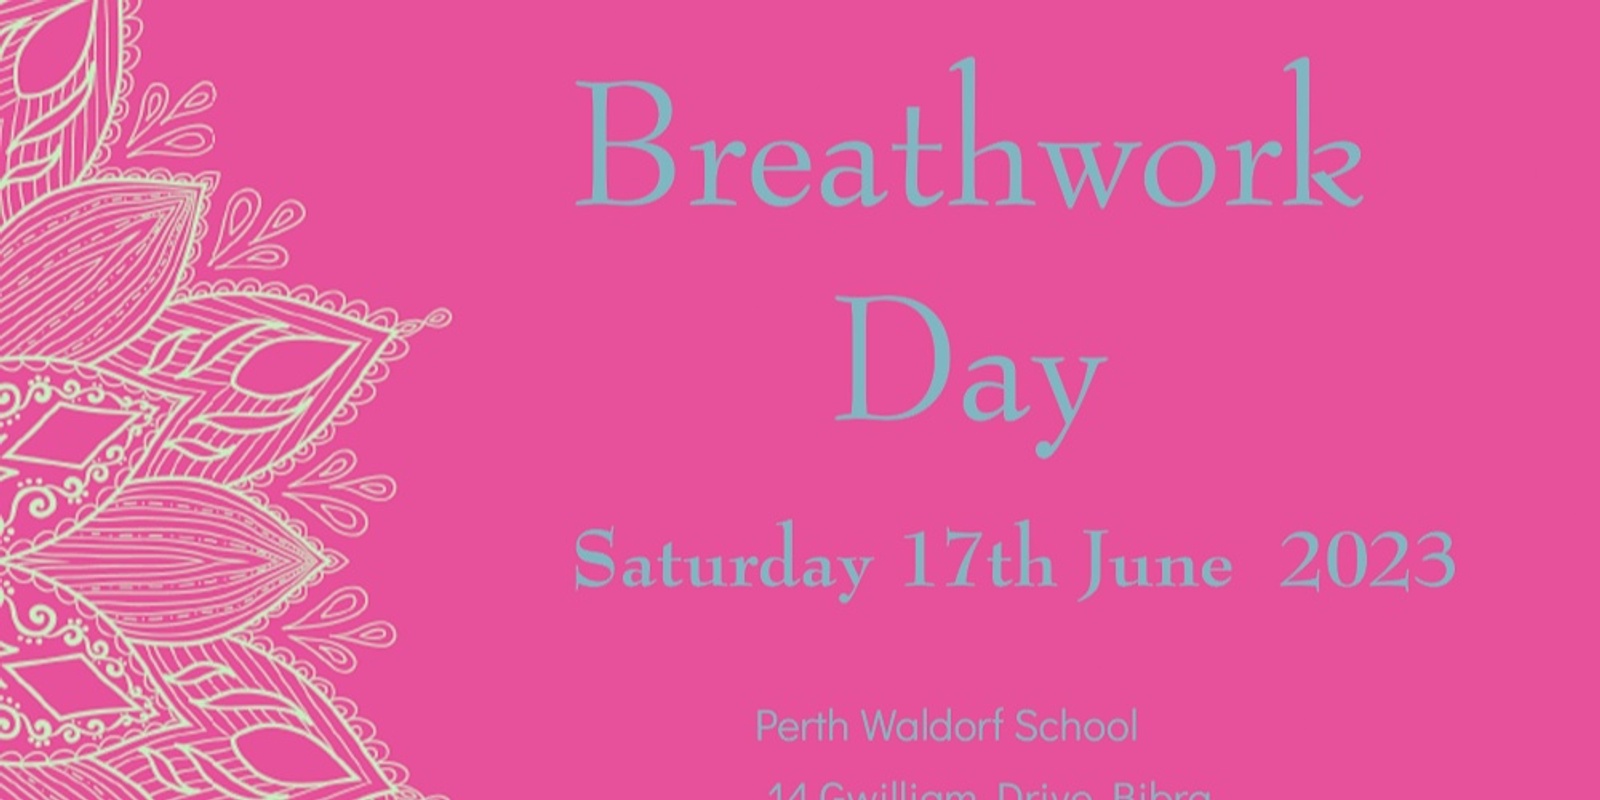 Banner image for Breathwork Day Saturday June 17th 2023